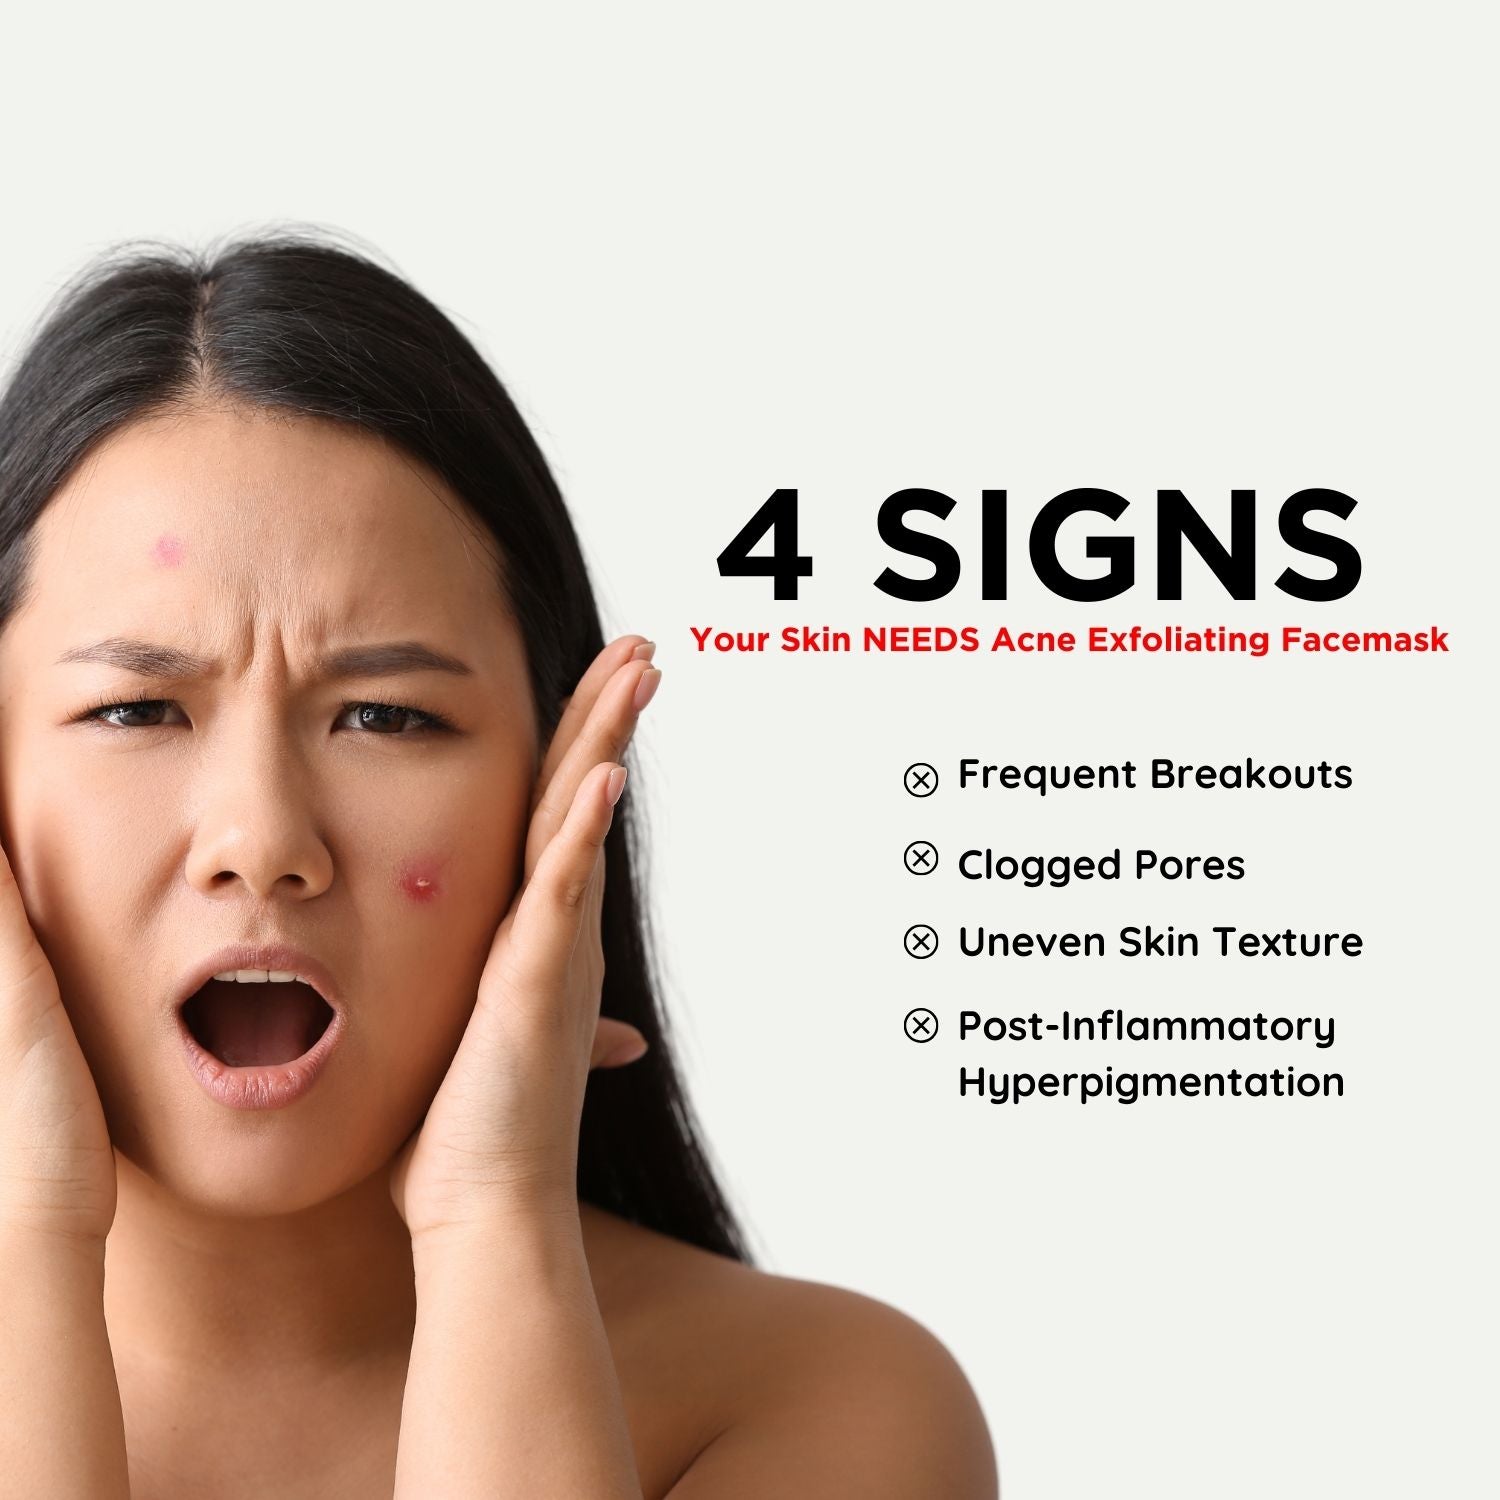 4 signs of acne your skin needs revive acne facemask